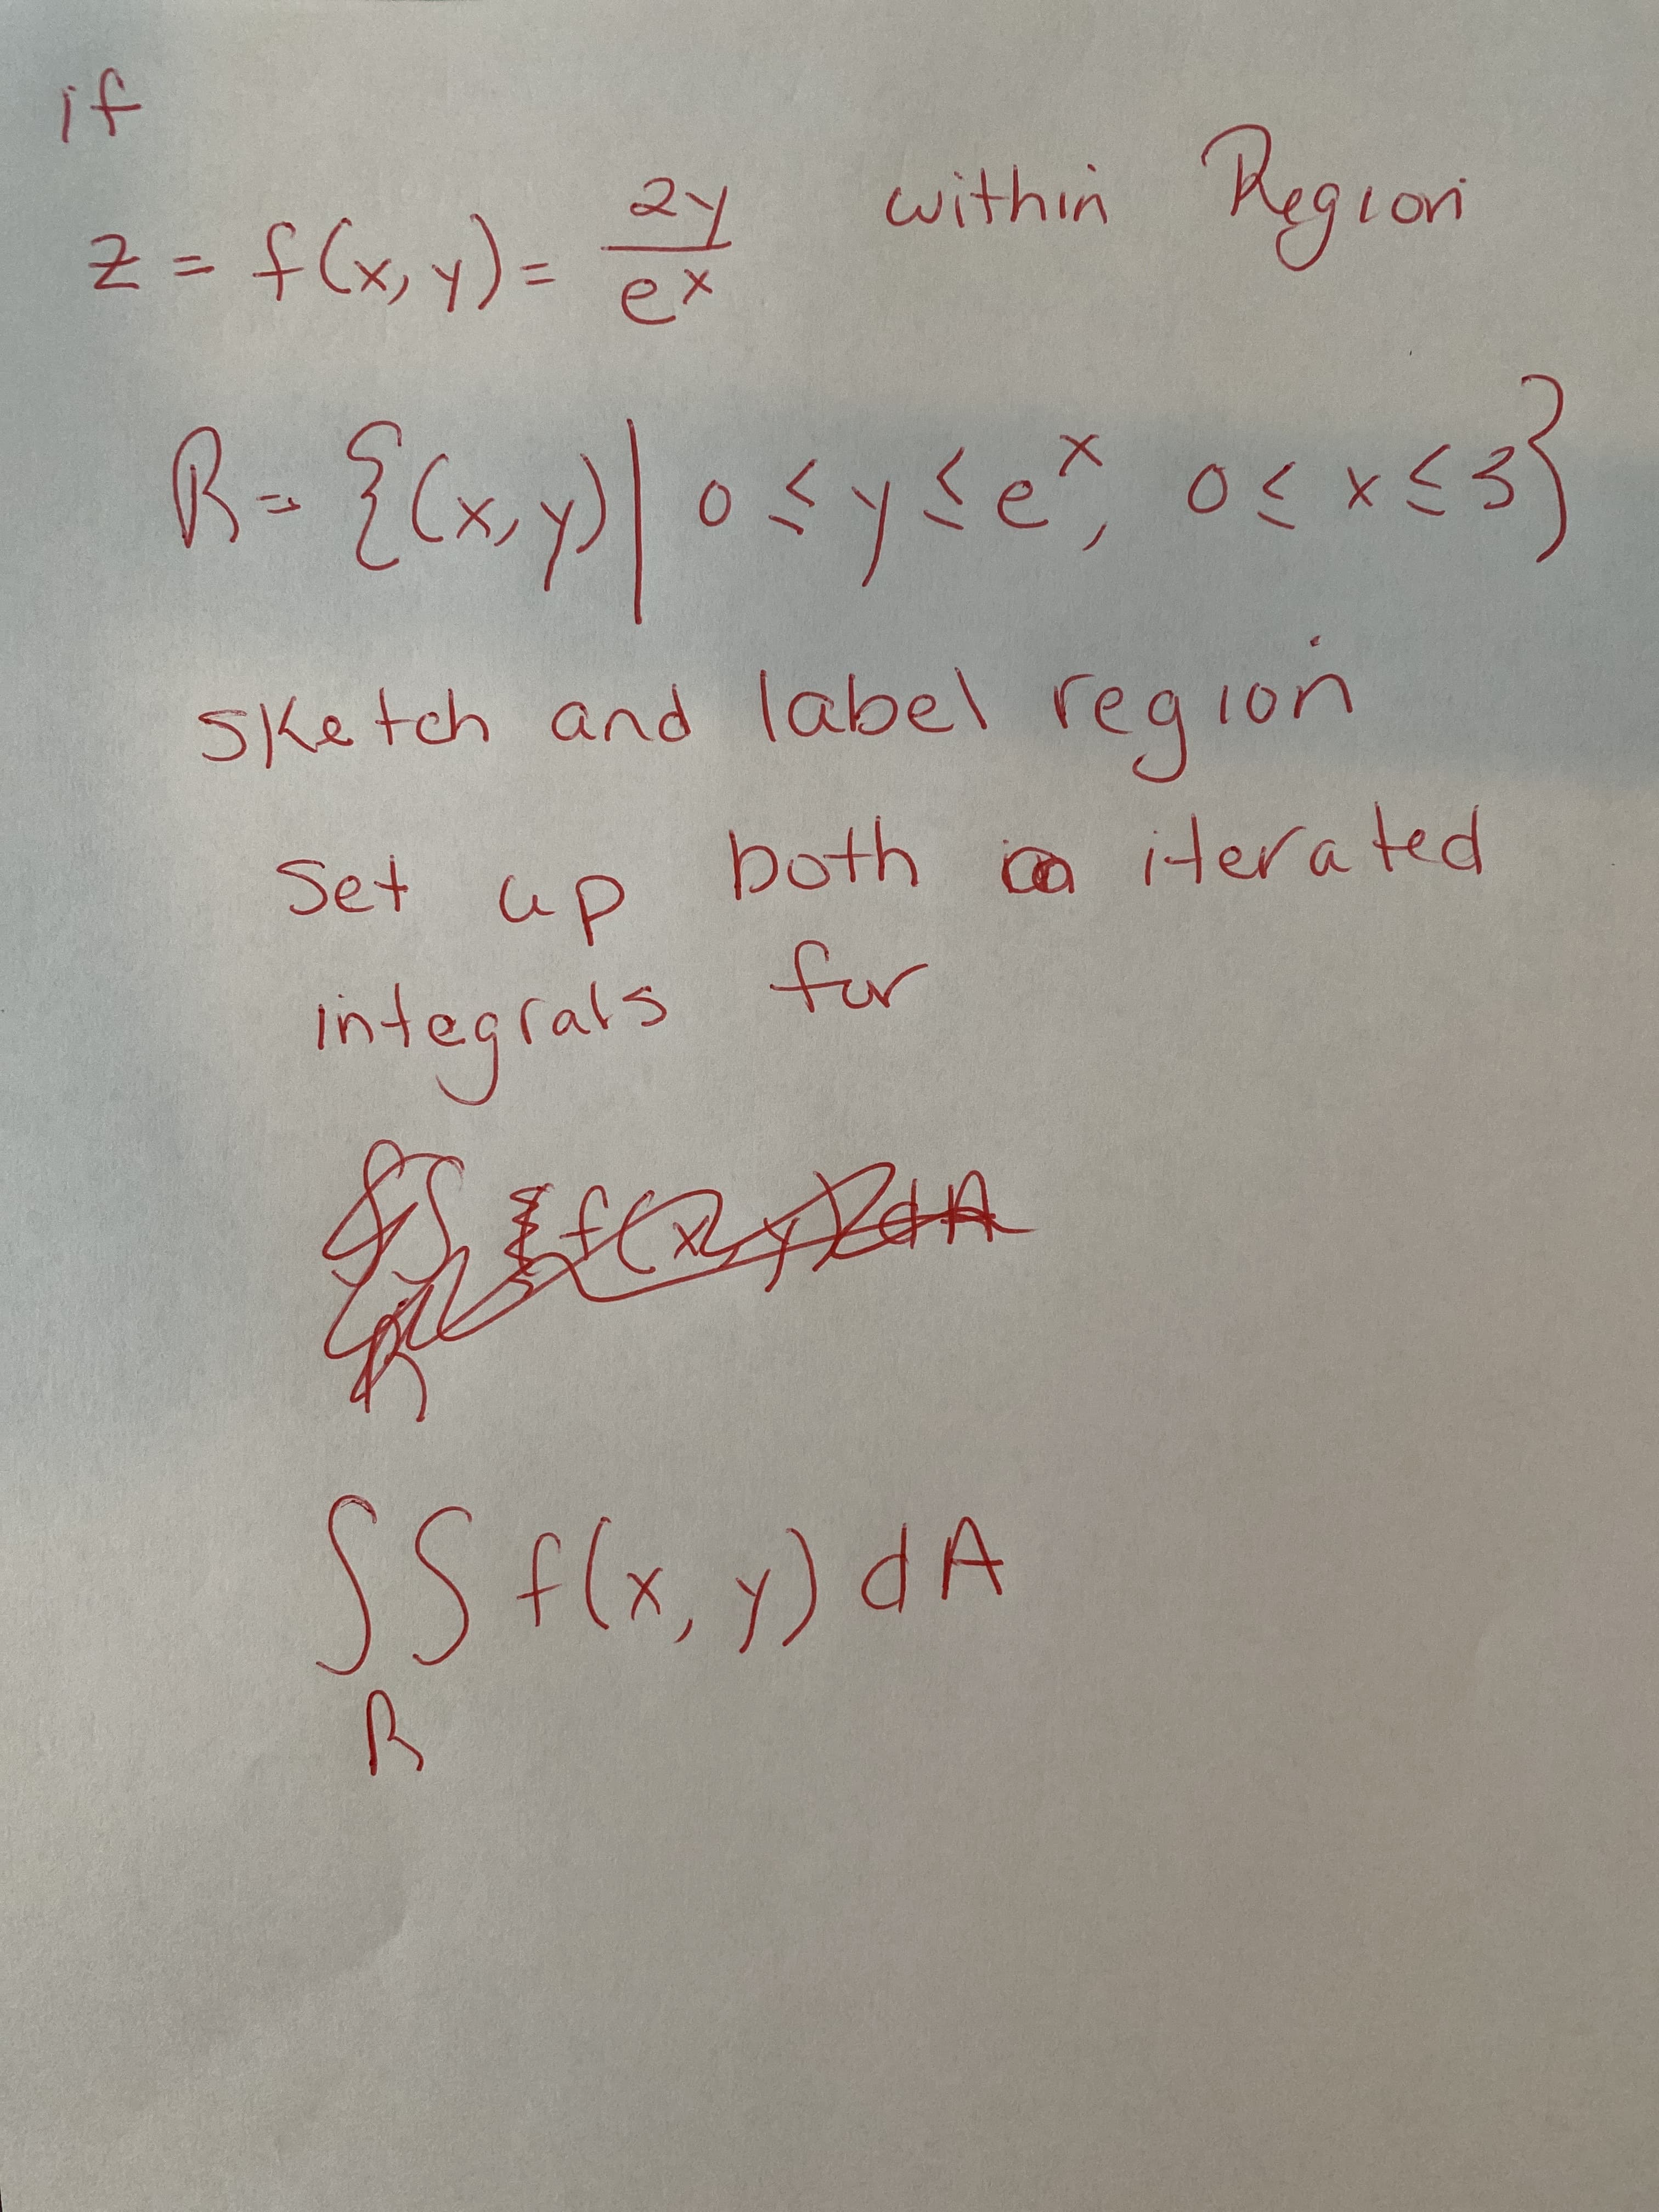 if
within Kegion
%3D
%3D
(トタ)き=そ
se
sketch and label region
Set
both
iterated
up
rals
integ
SSf(x, y) dA
